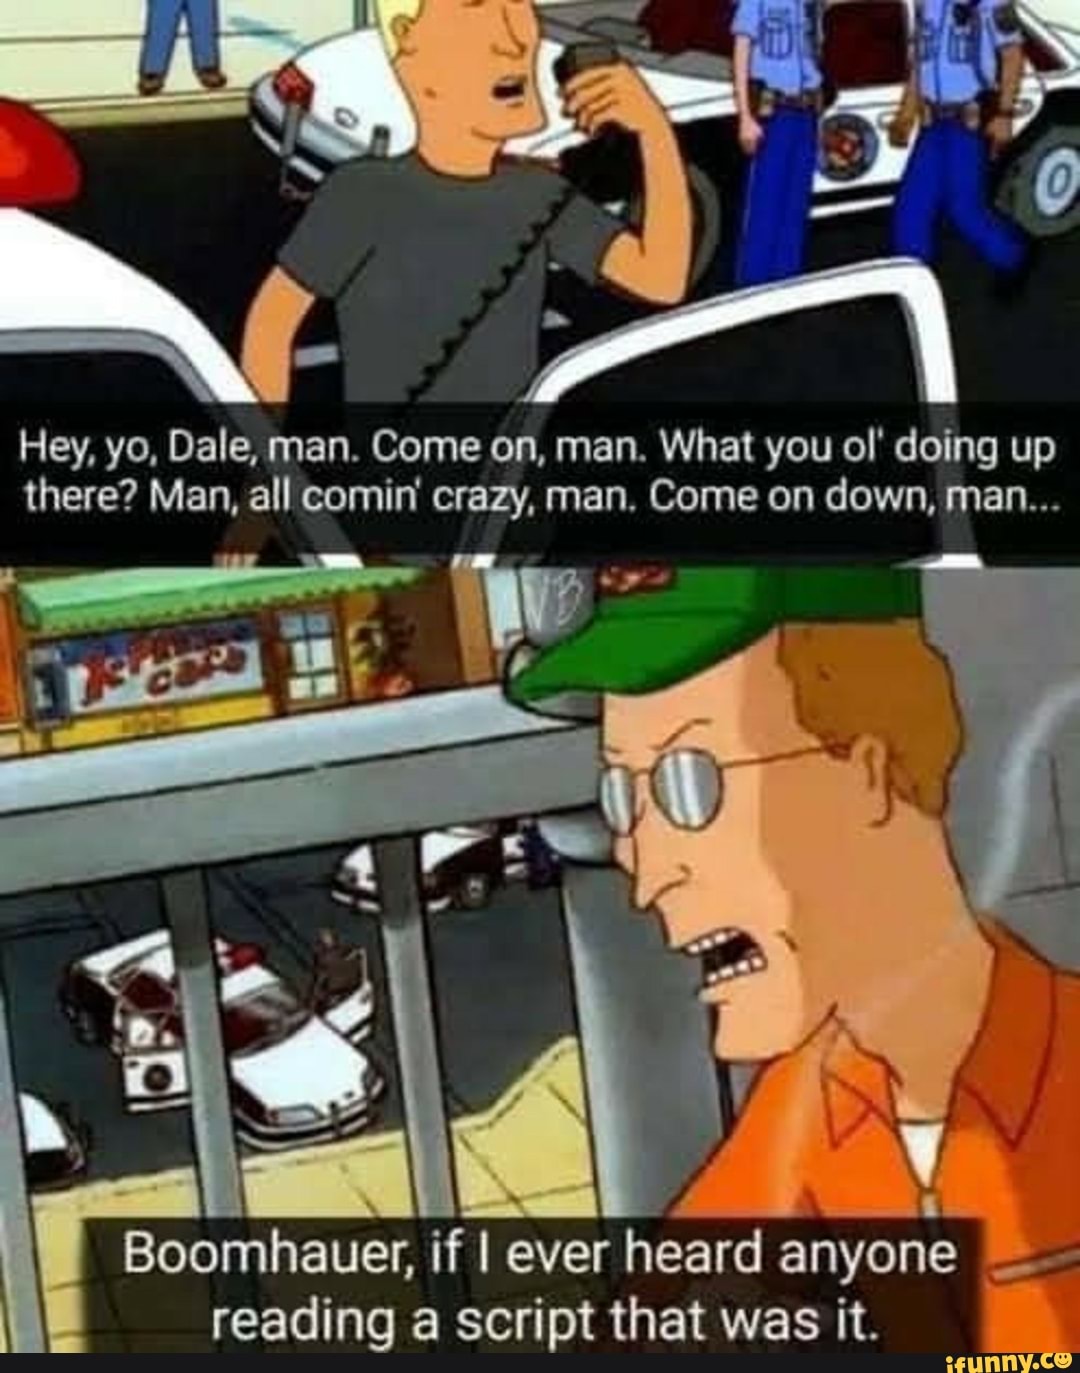 I Am Unknowable: The Dale Gribble Story